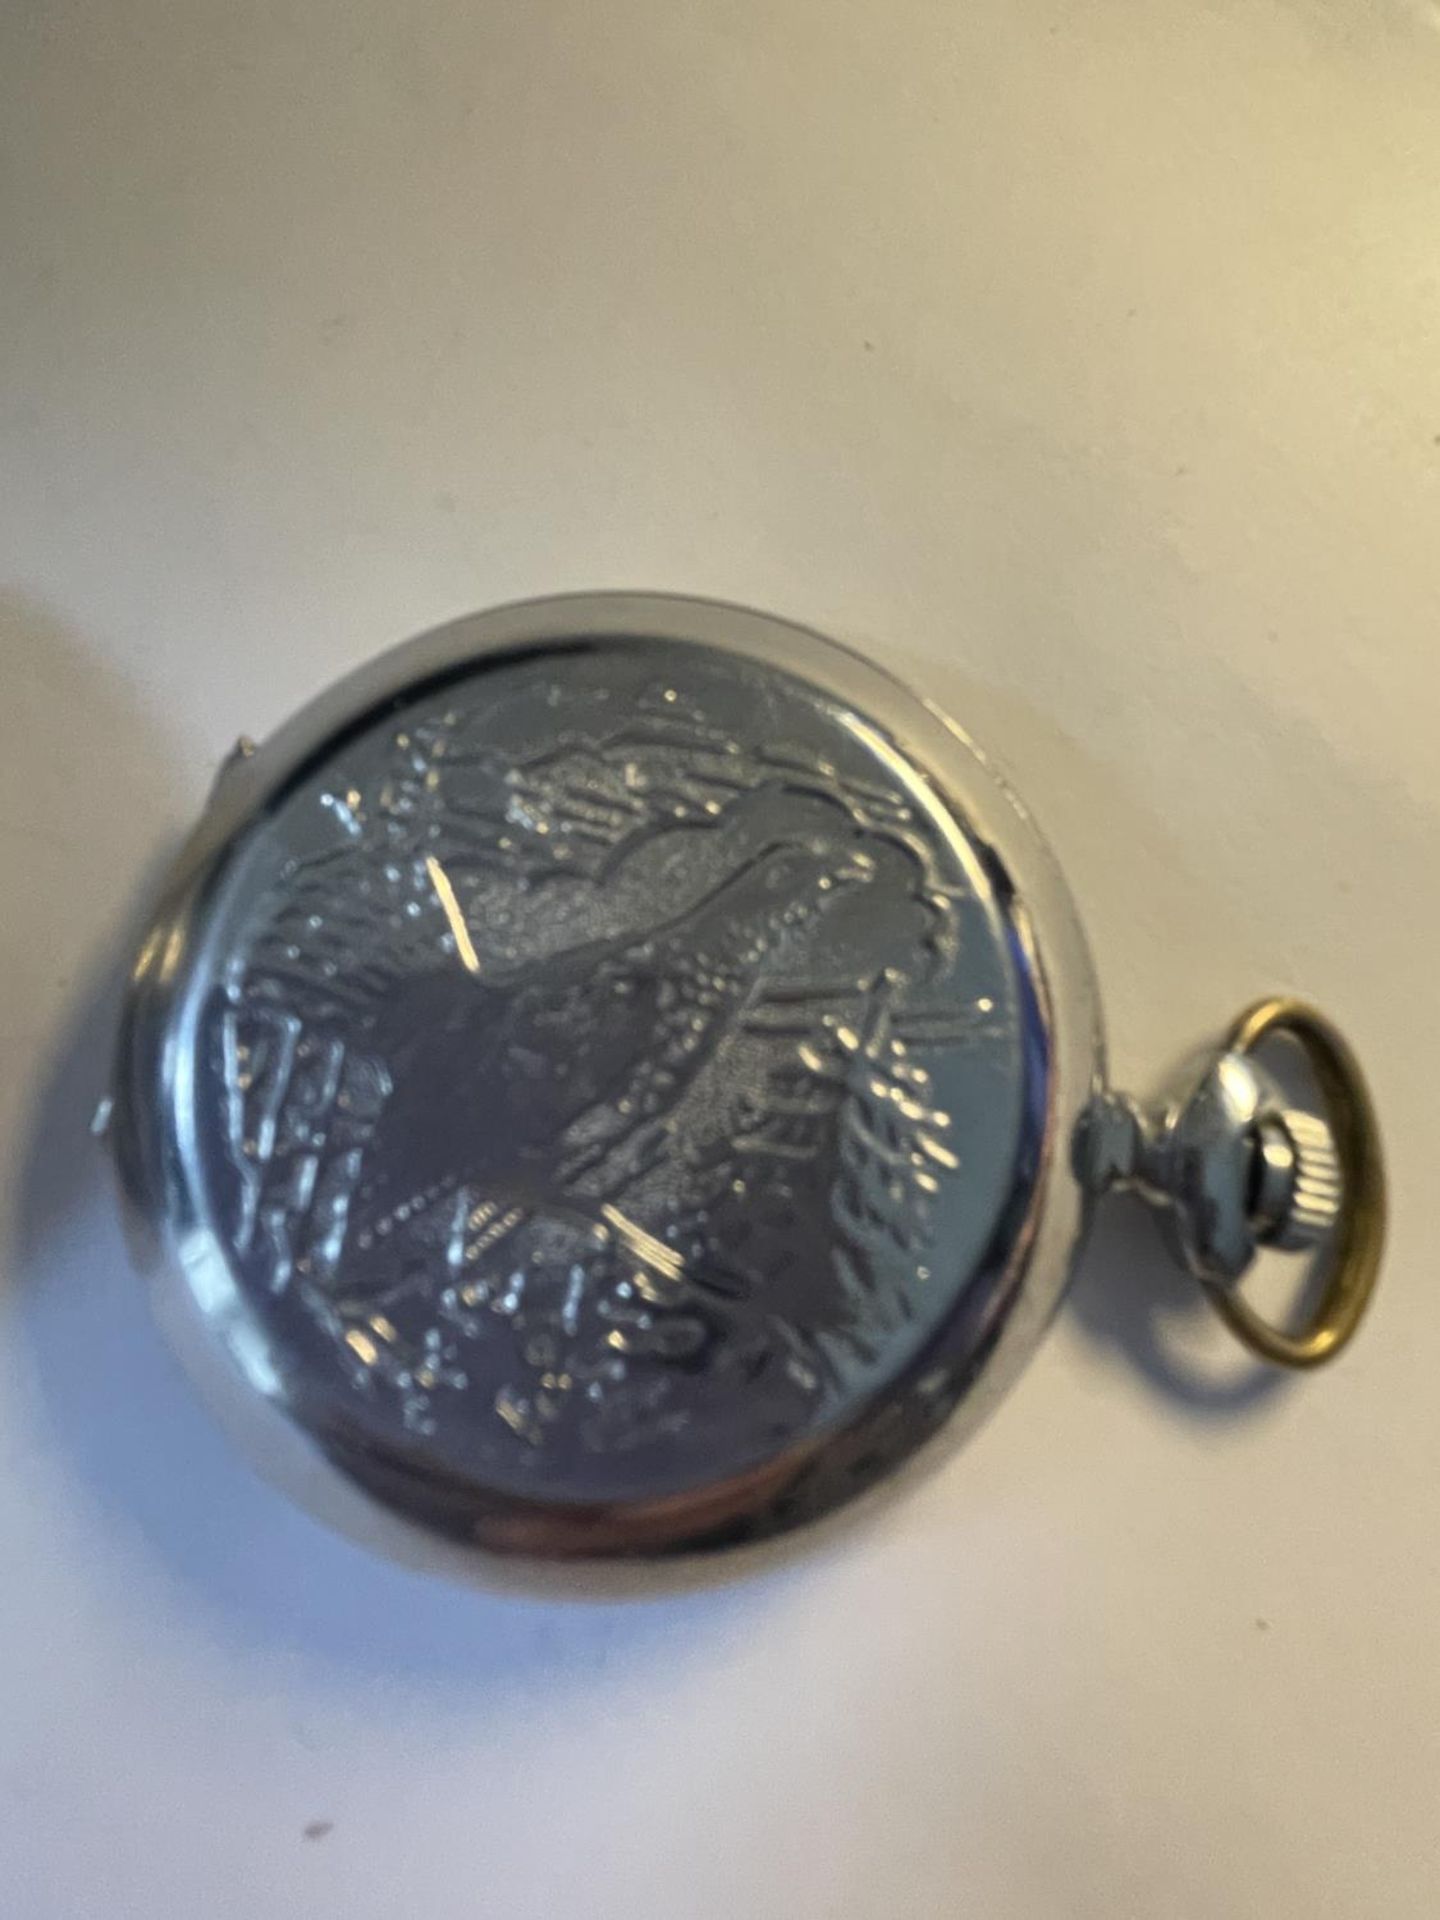 TWO CHROME POCKET WATCHES - Image 4 of 4